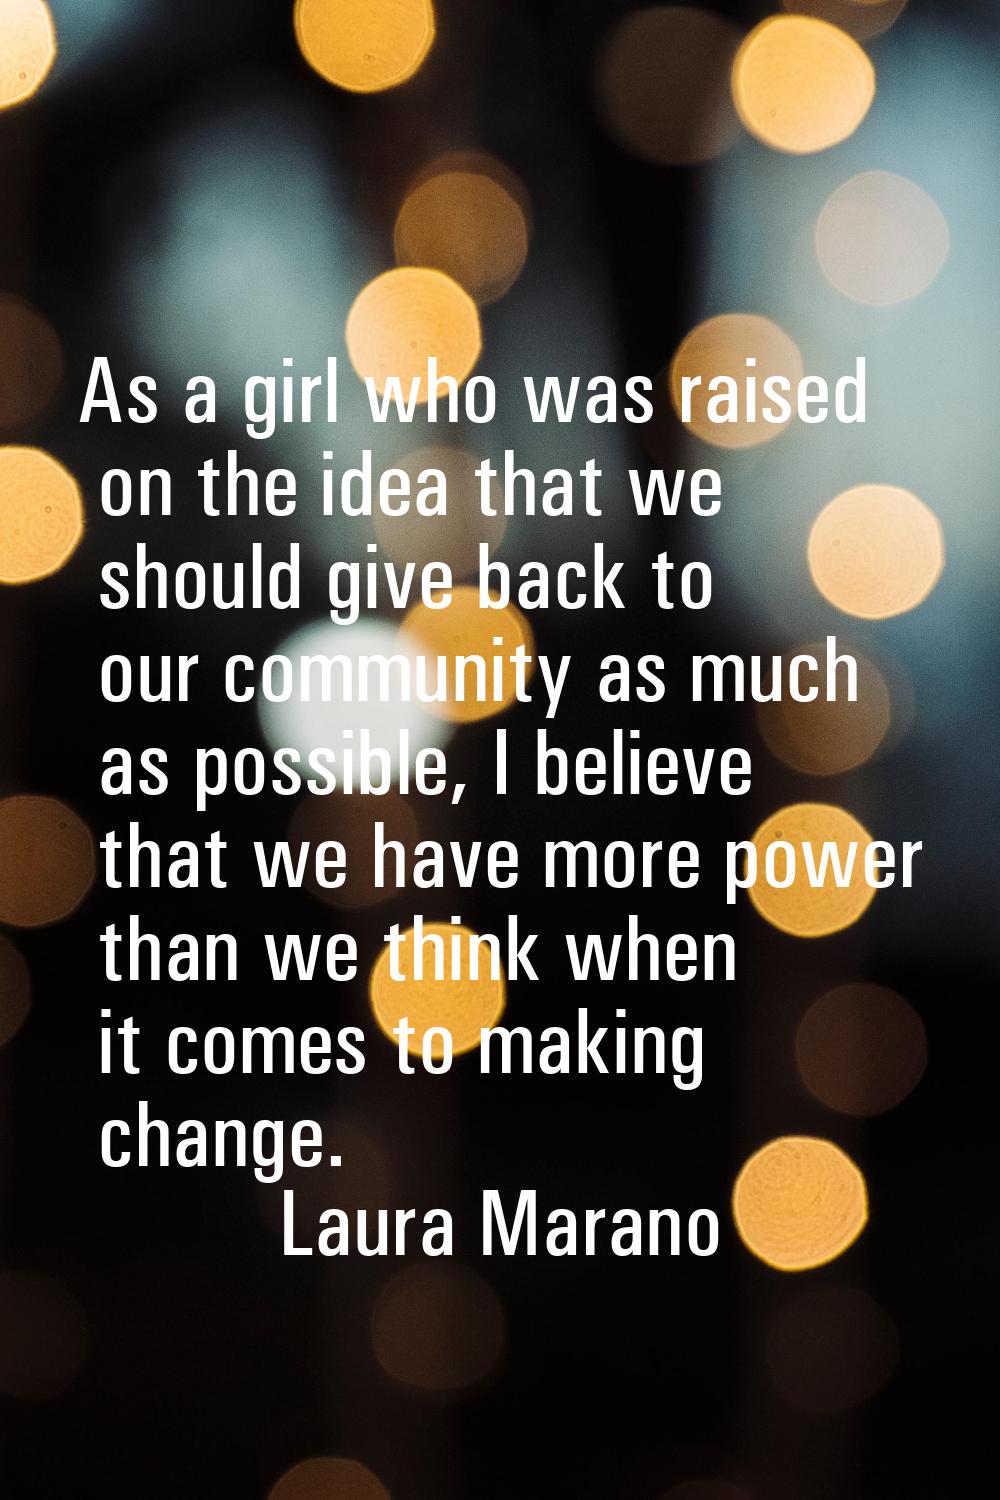 As a girl who was raised on the idea that we should give back to our community as much as possible,